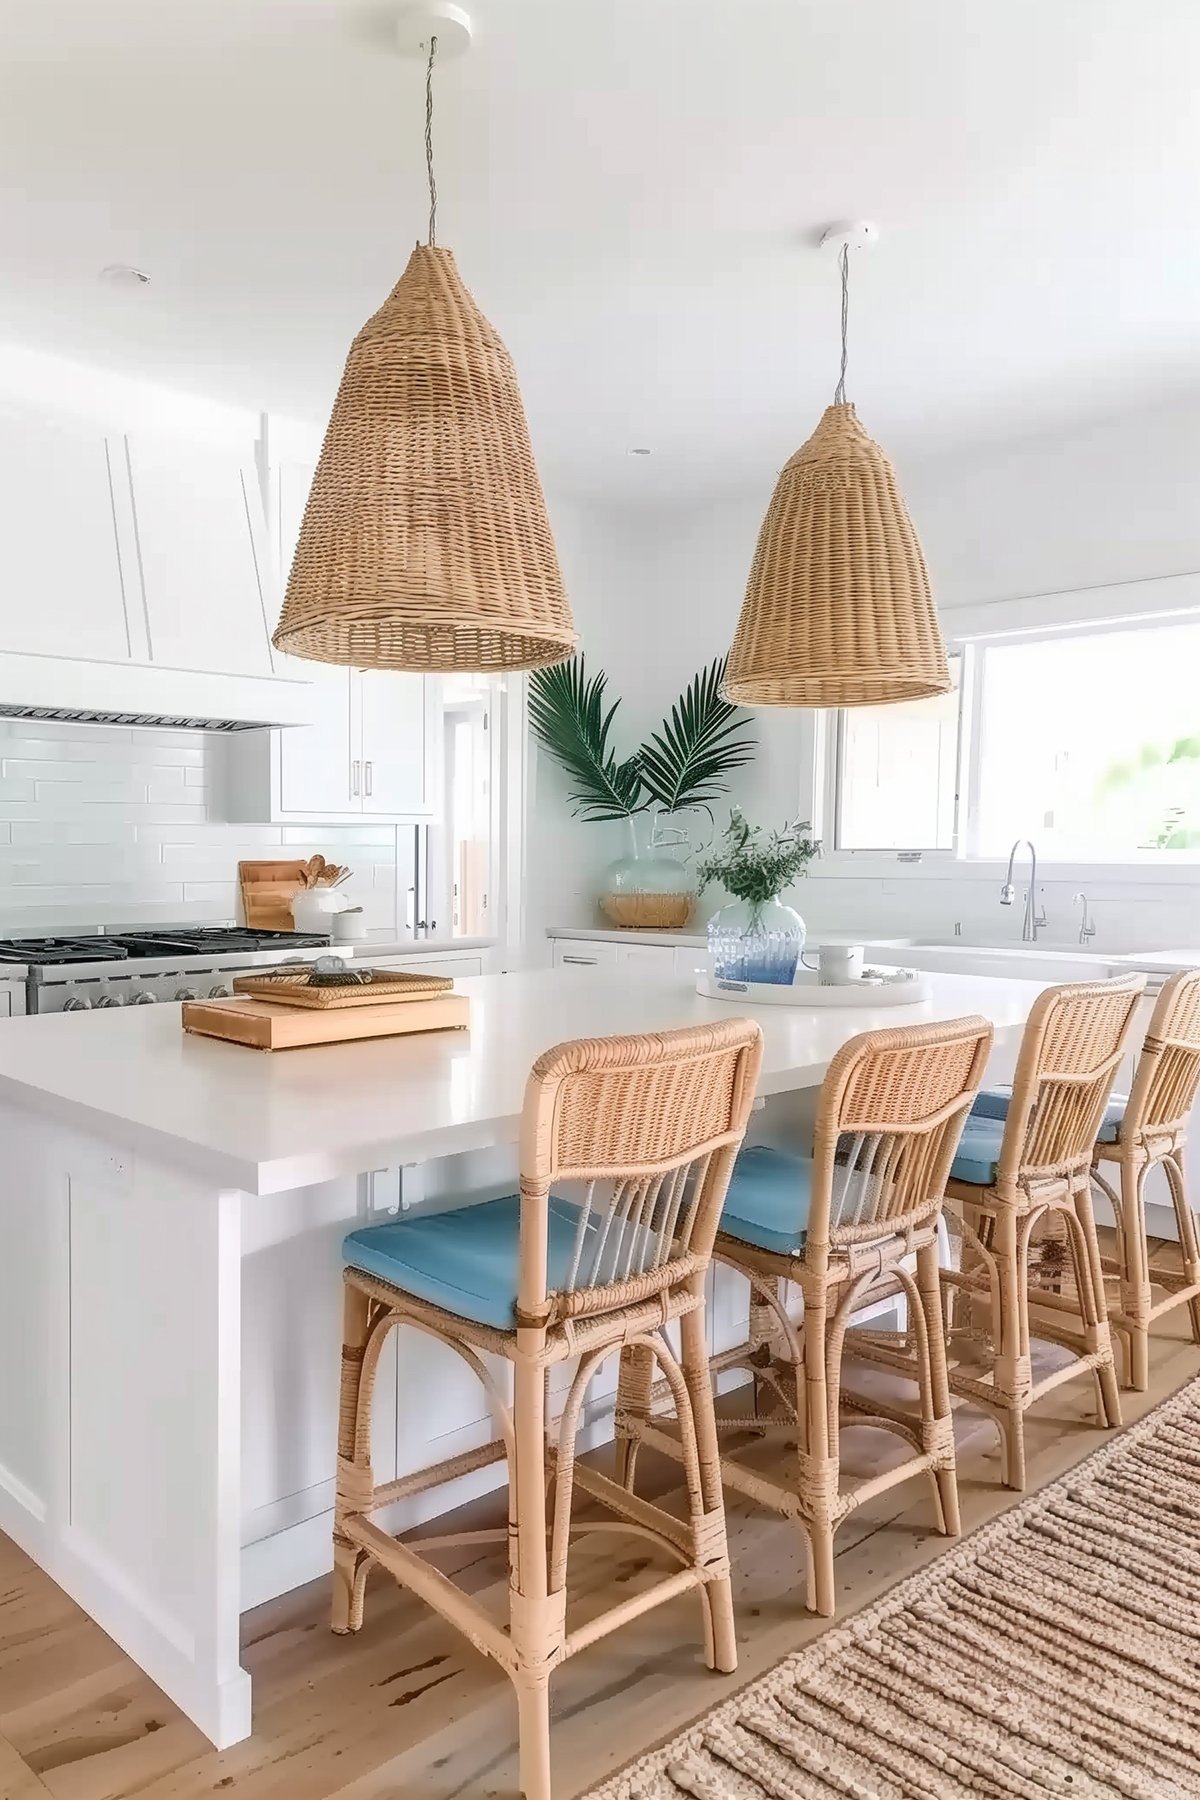 white kitchen with rattan pendant lights over the island and rattan and blue barstools.